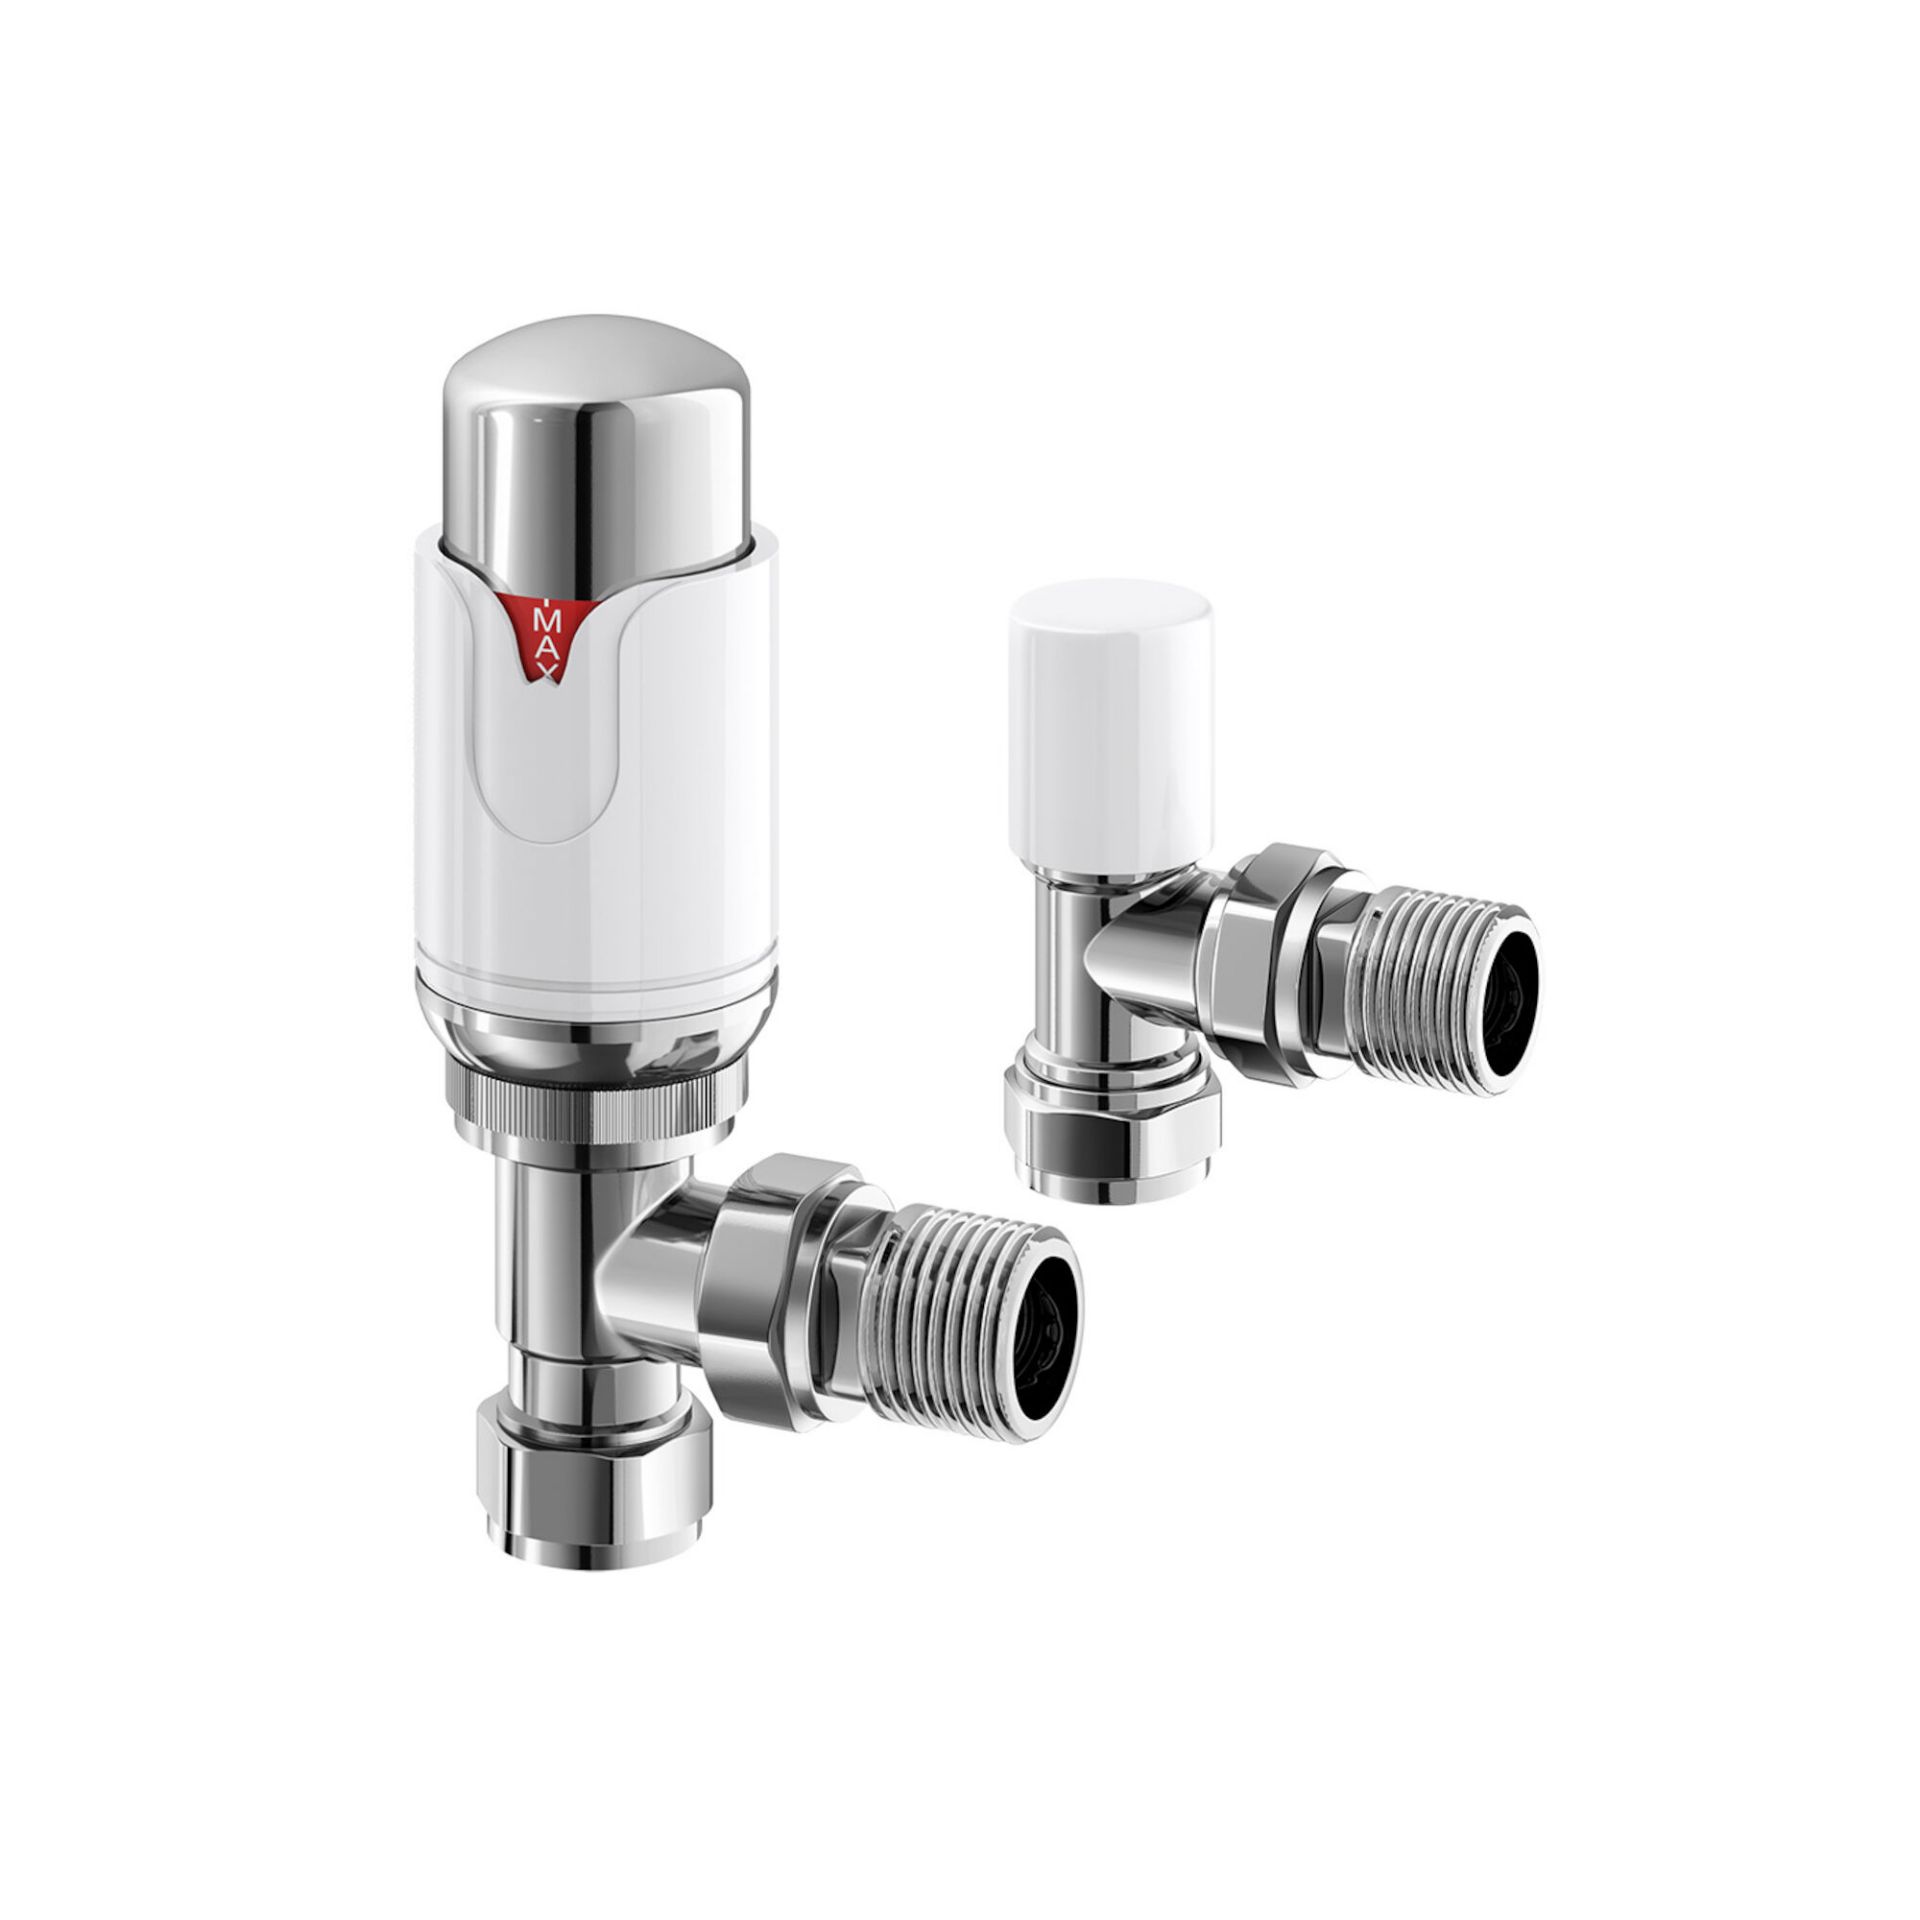 (E1015) 15mm Standard Connection Thermostatic Angled Gloss White & Chrome Radiator Valves Soli... - Image 2 of 3